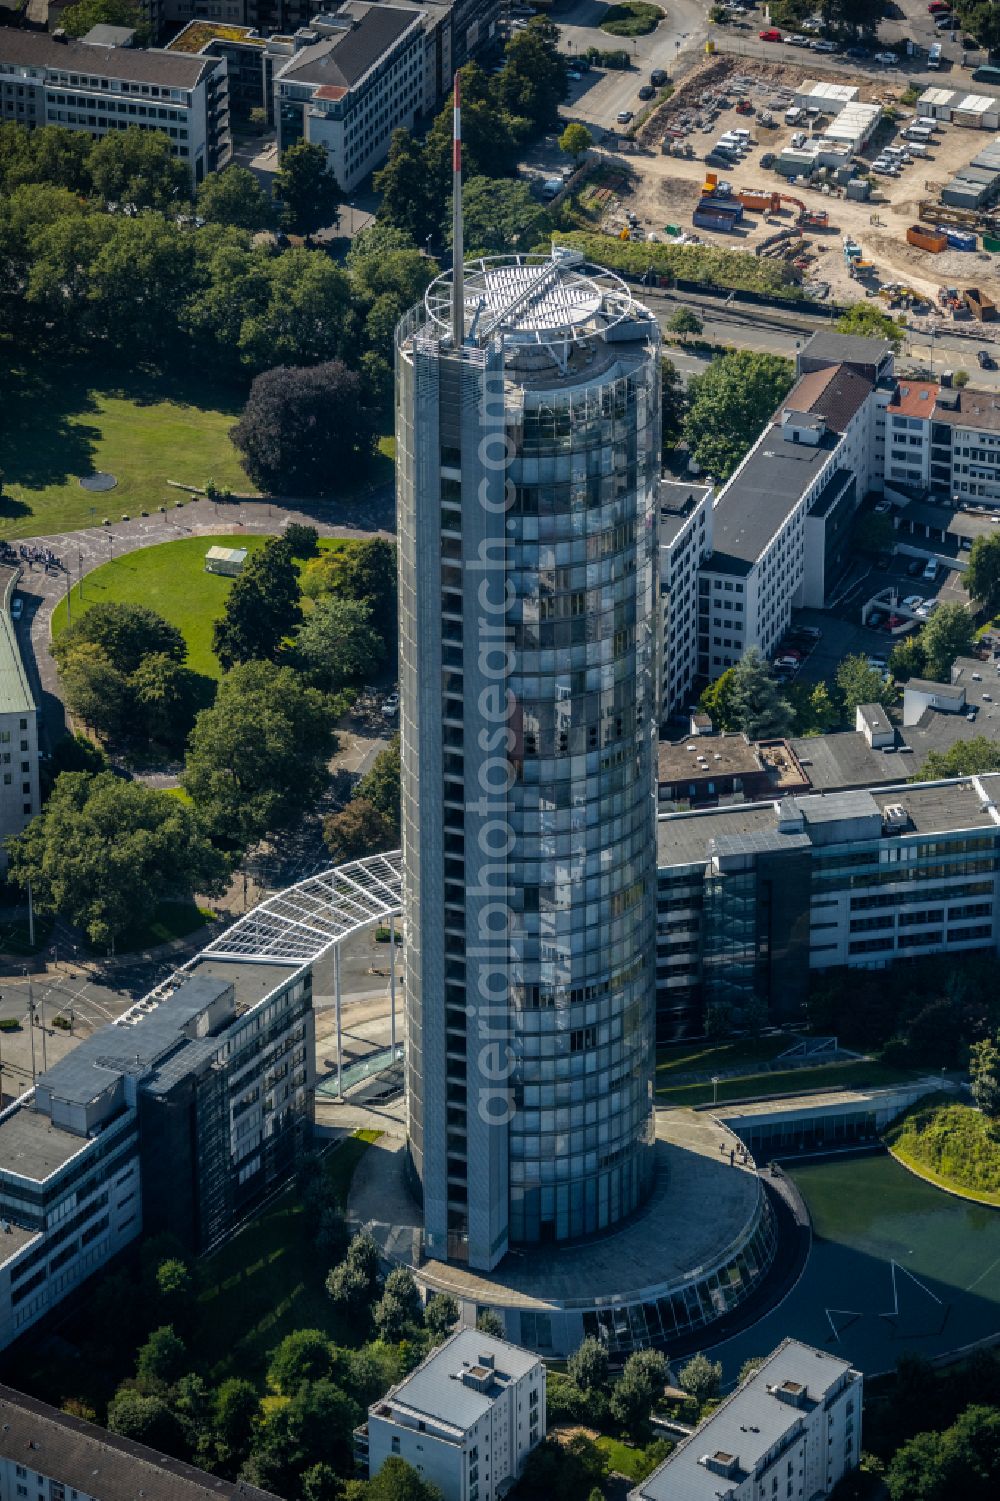 Essen from the bird's eye view: Office building of the administrative and business center of the headquarters of the energy provider RWE at the RWE Tower in the district Suedviertel in Essen at Ruhrgebiet in North Rhine-Westphalia